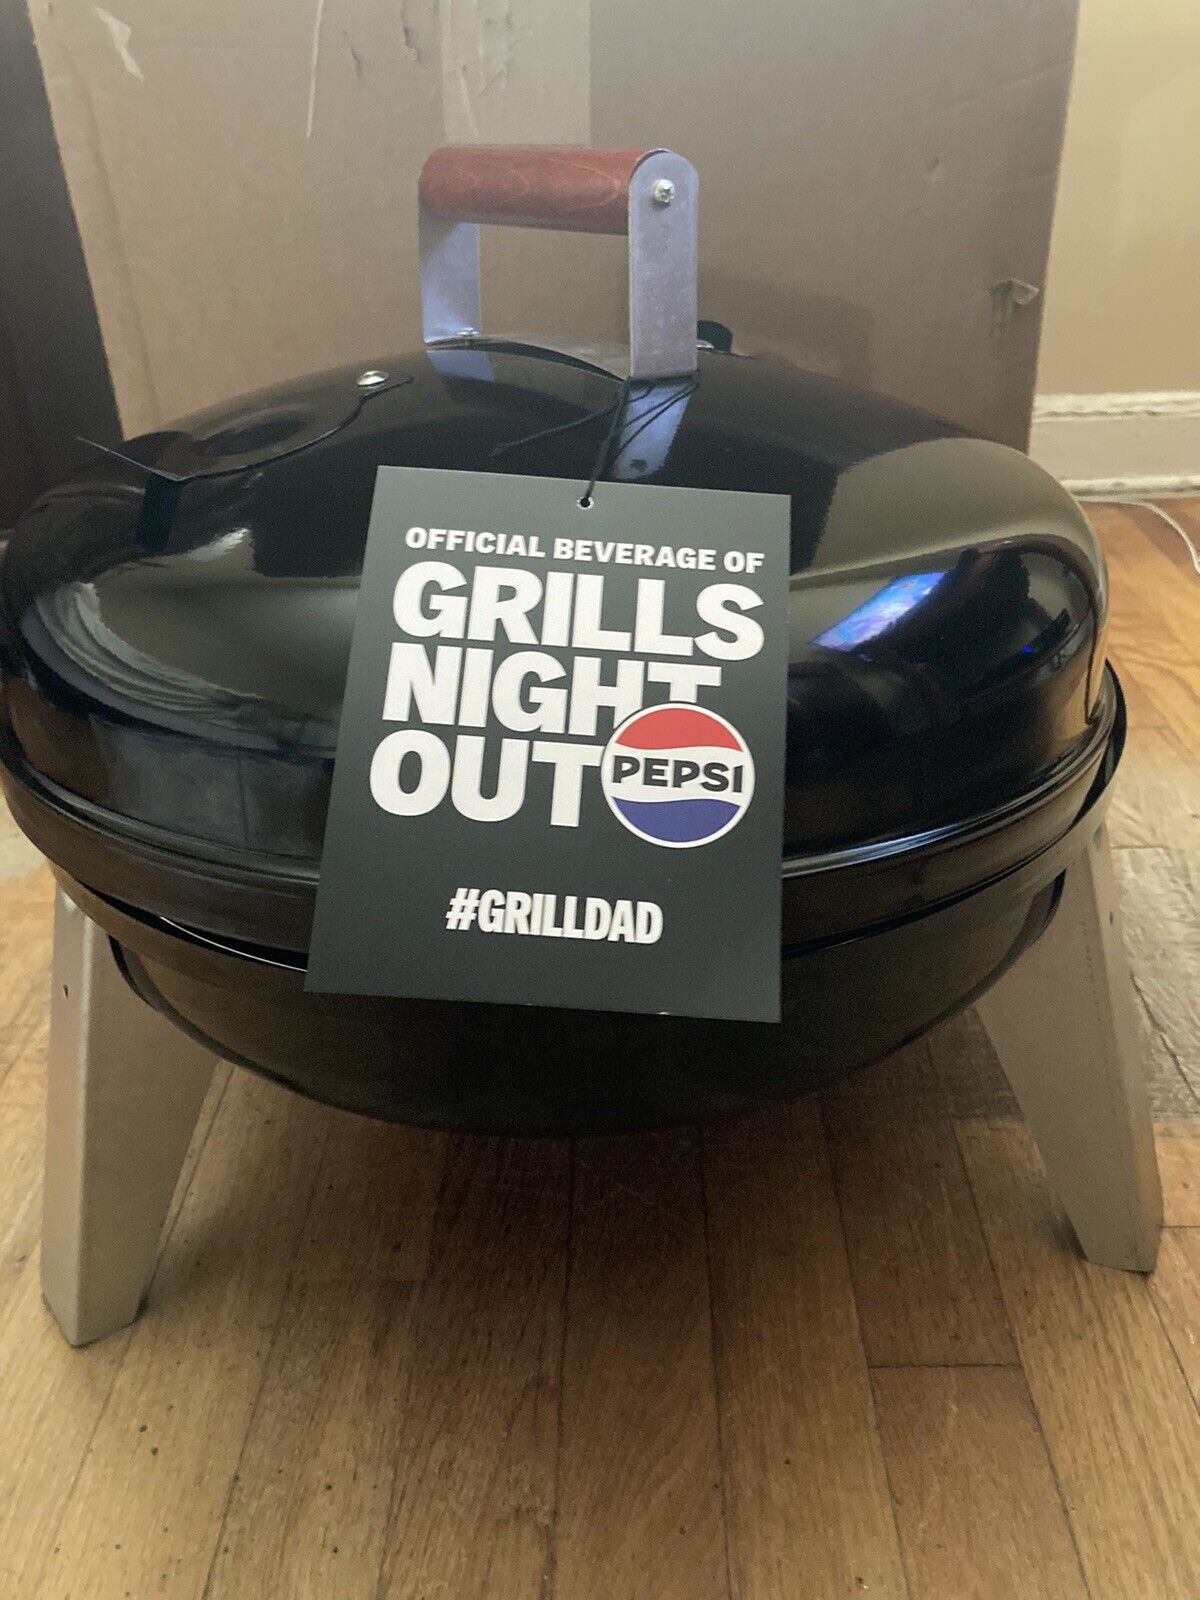 Pepsi Grills Night Out Sweepstakes Custom Hibachi Grill (including Grill Brush)